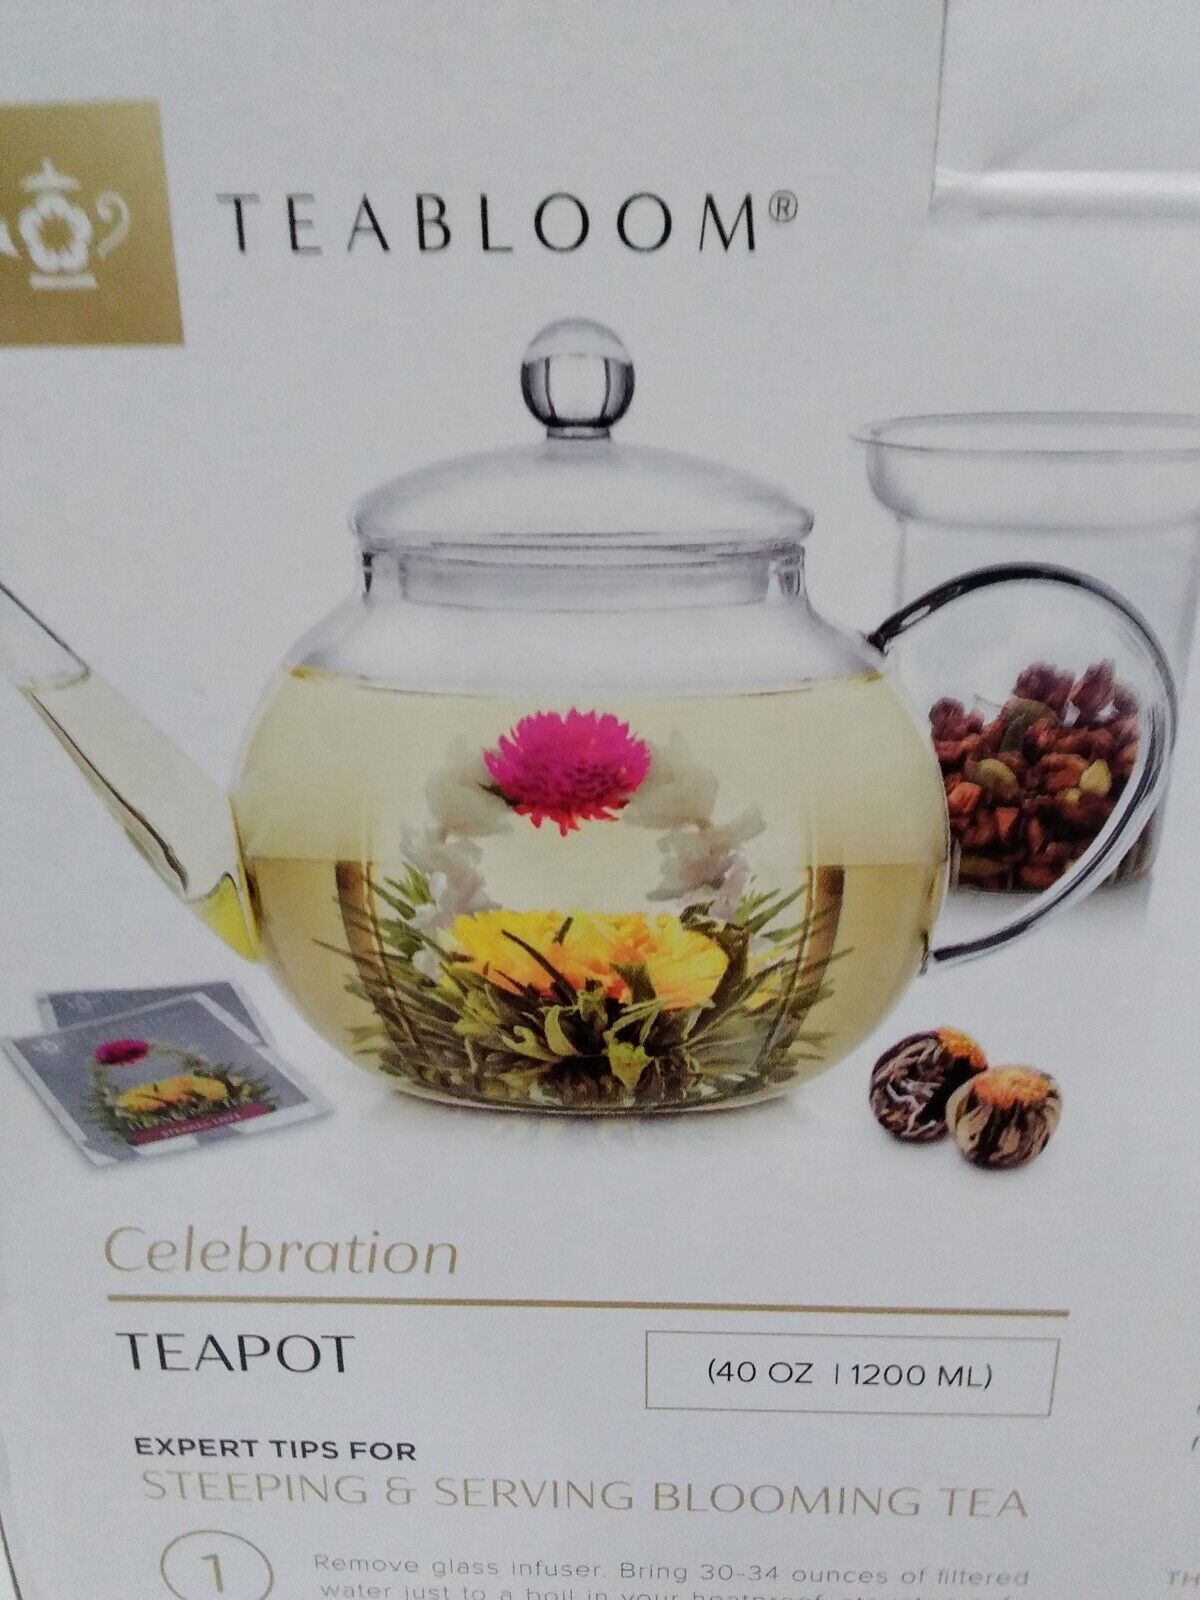 TEABLOOM TEAPOT BRAND NEW COMES WITH BASE, DIFFUSER, TWO BLOOMING TEA FLOWERS